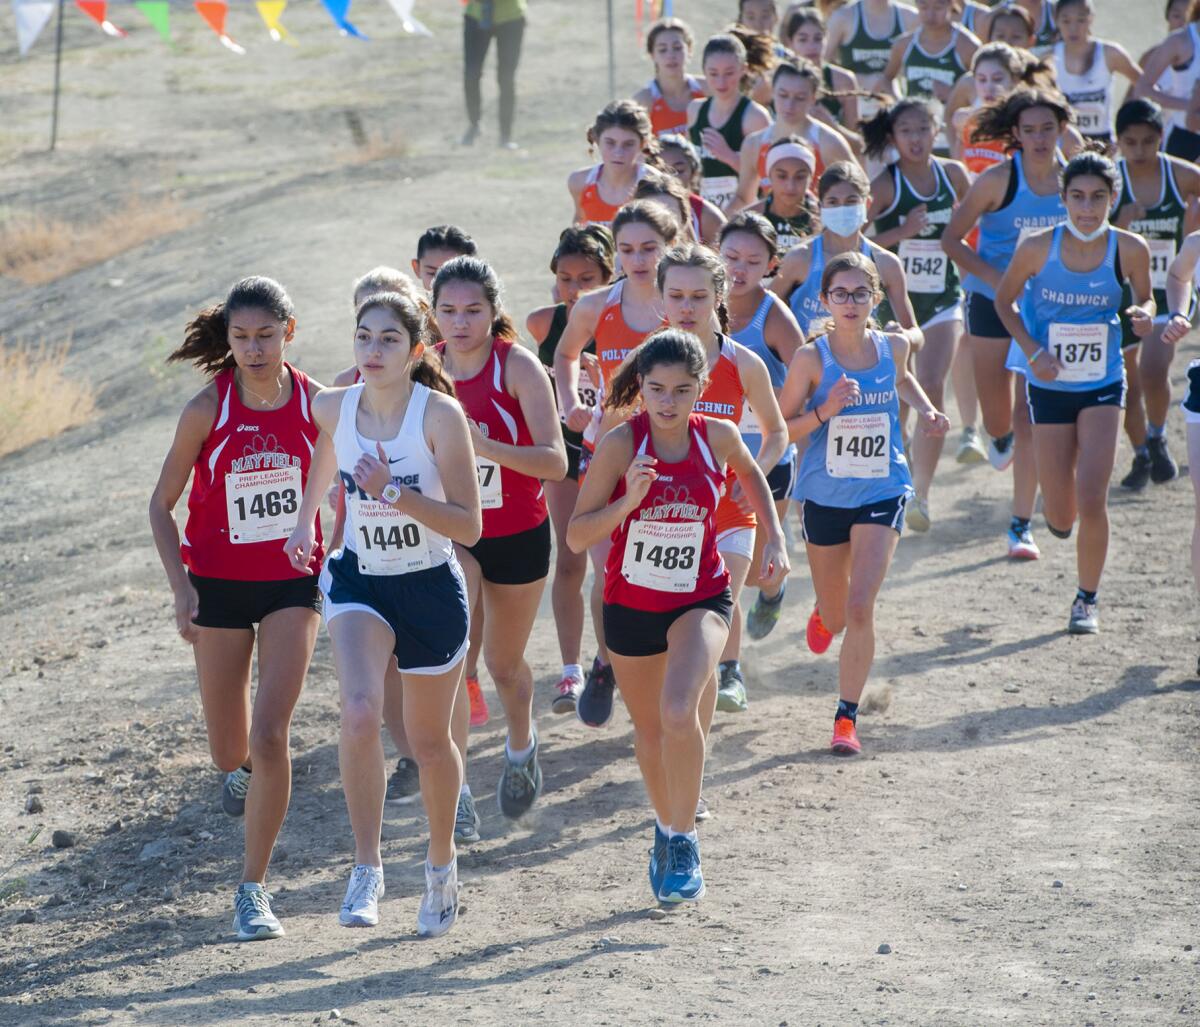 Flintridge Prep's Nicole Mirzaian (#1440) is at the front of the pack at the start of the girls varsity Prep League Cross Country finals at Pierce College Saturday. (Photo by Miguel Vasconcellos)